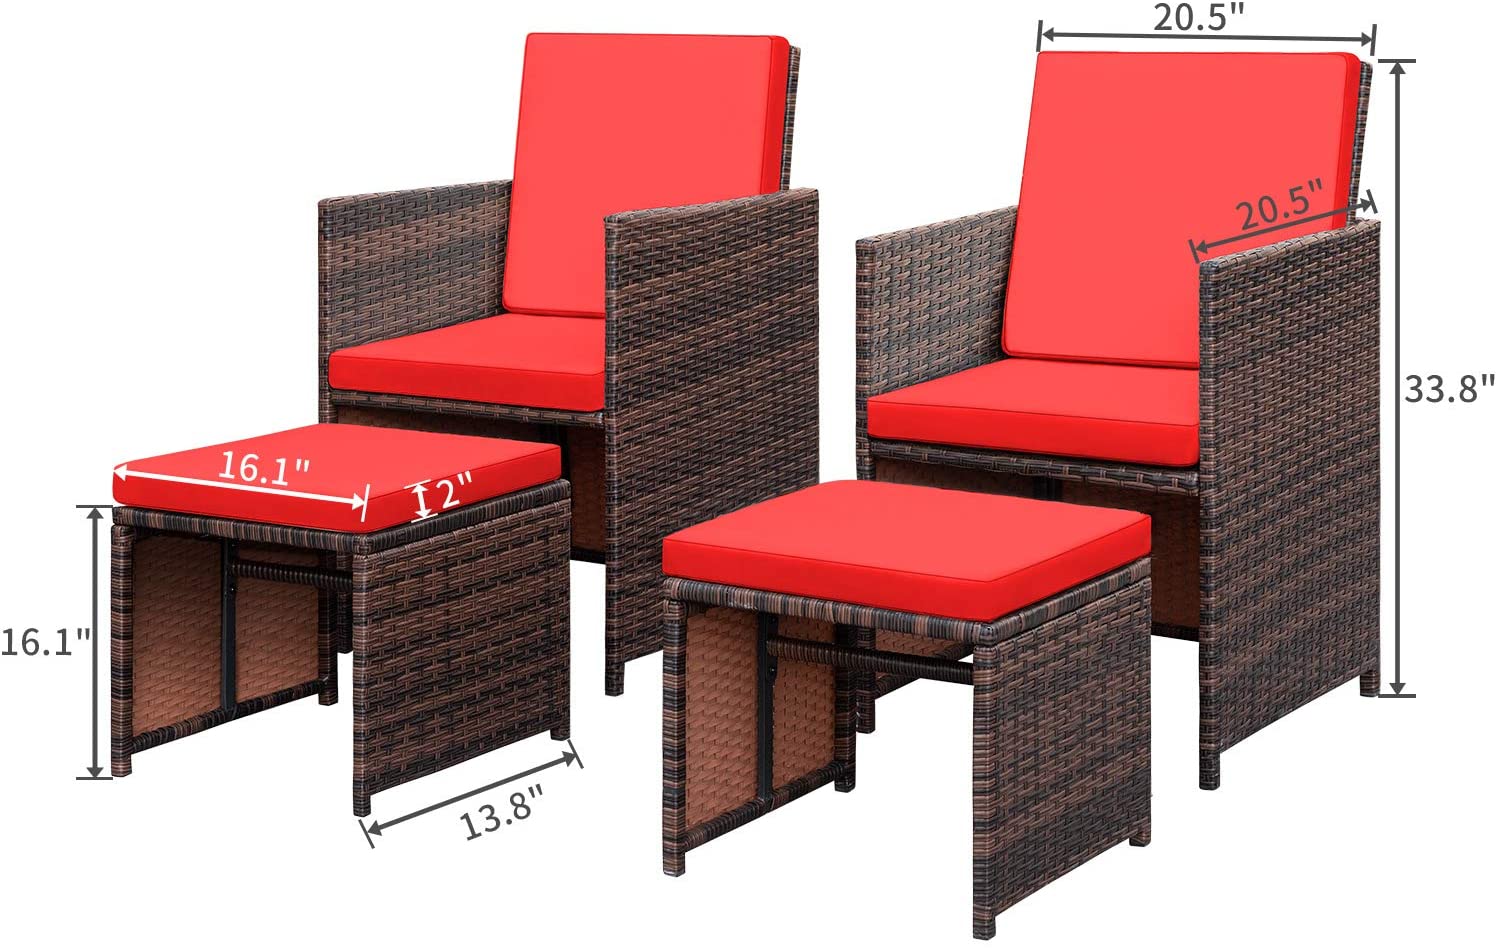 Lacoo 4 Pieces Patio Wicker Furniture Conversation Set with Two Ottomans Collapsible Balcony Porch Furniture, Red - image 3 of 3